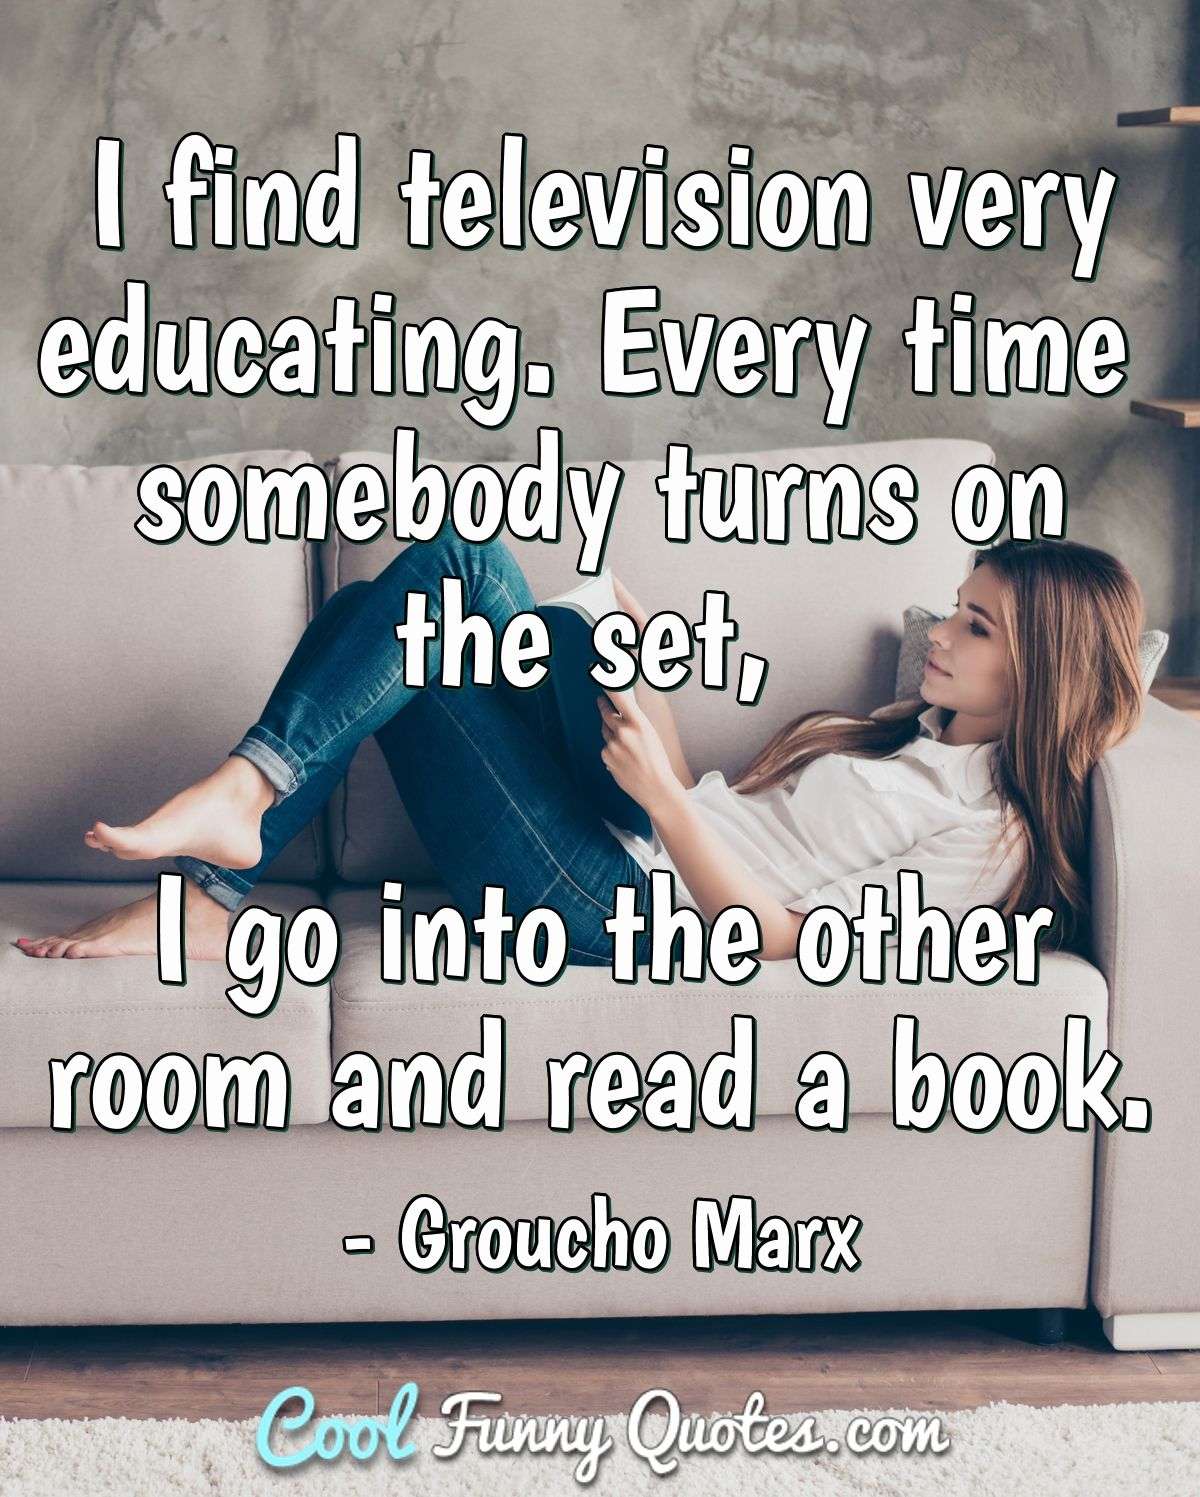 I find television very educating. Every time somebody turns on the set, I go into the other room and read a book. - Groucho Marx